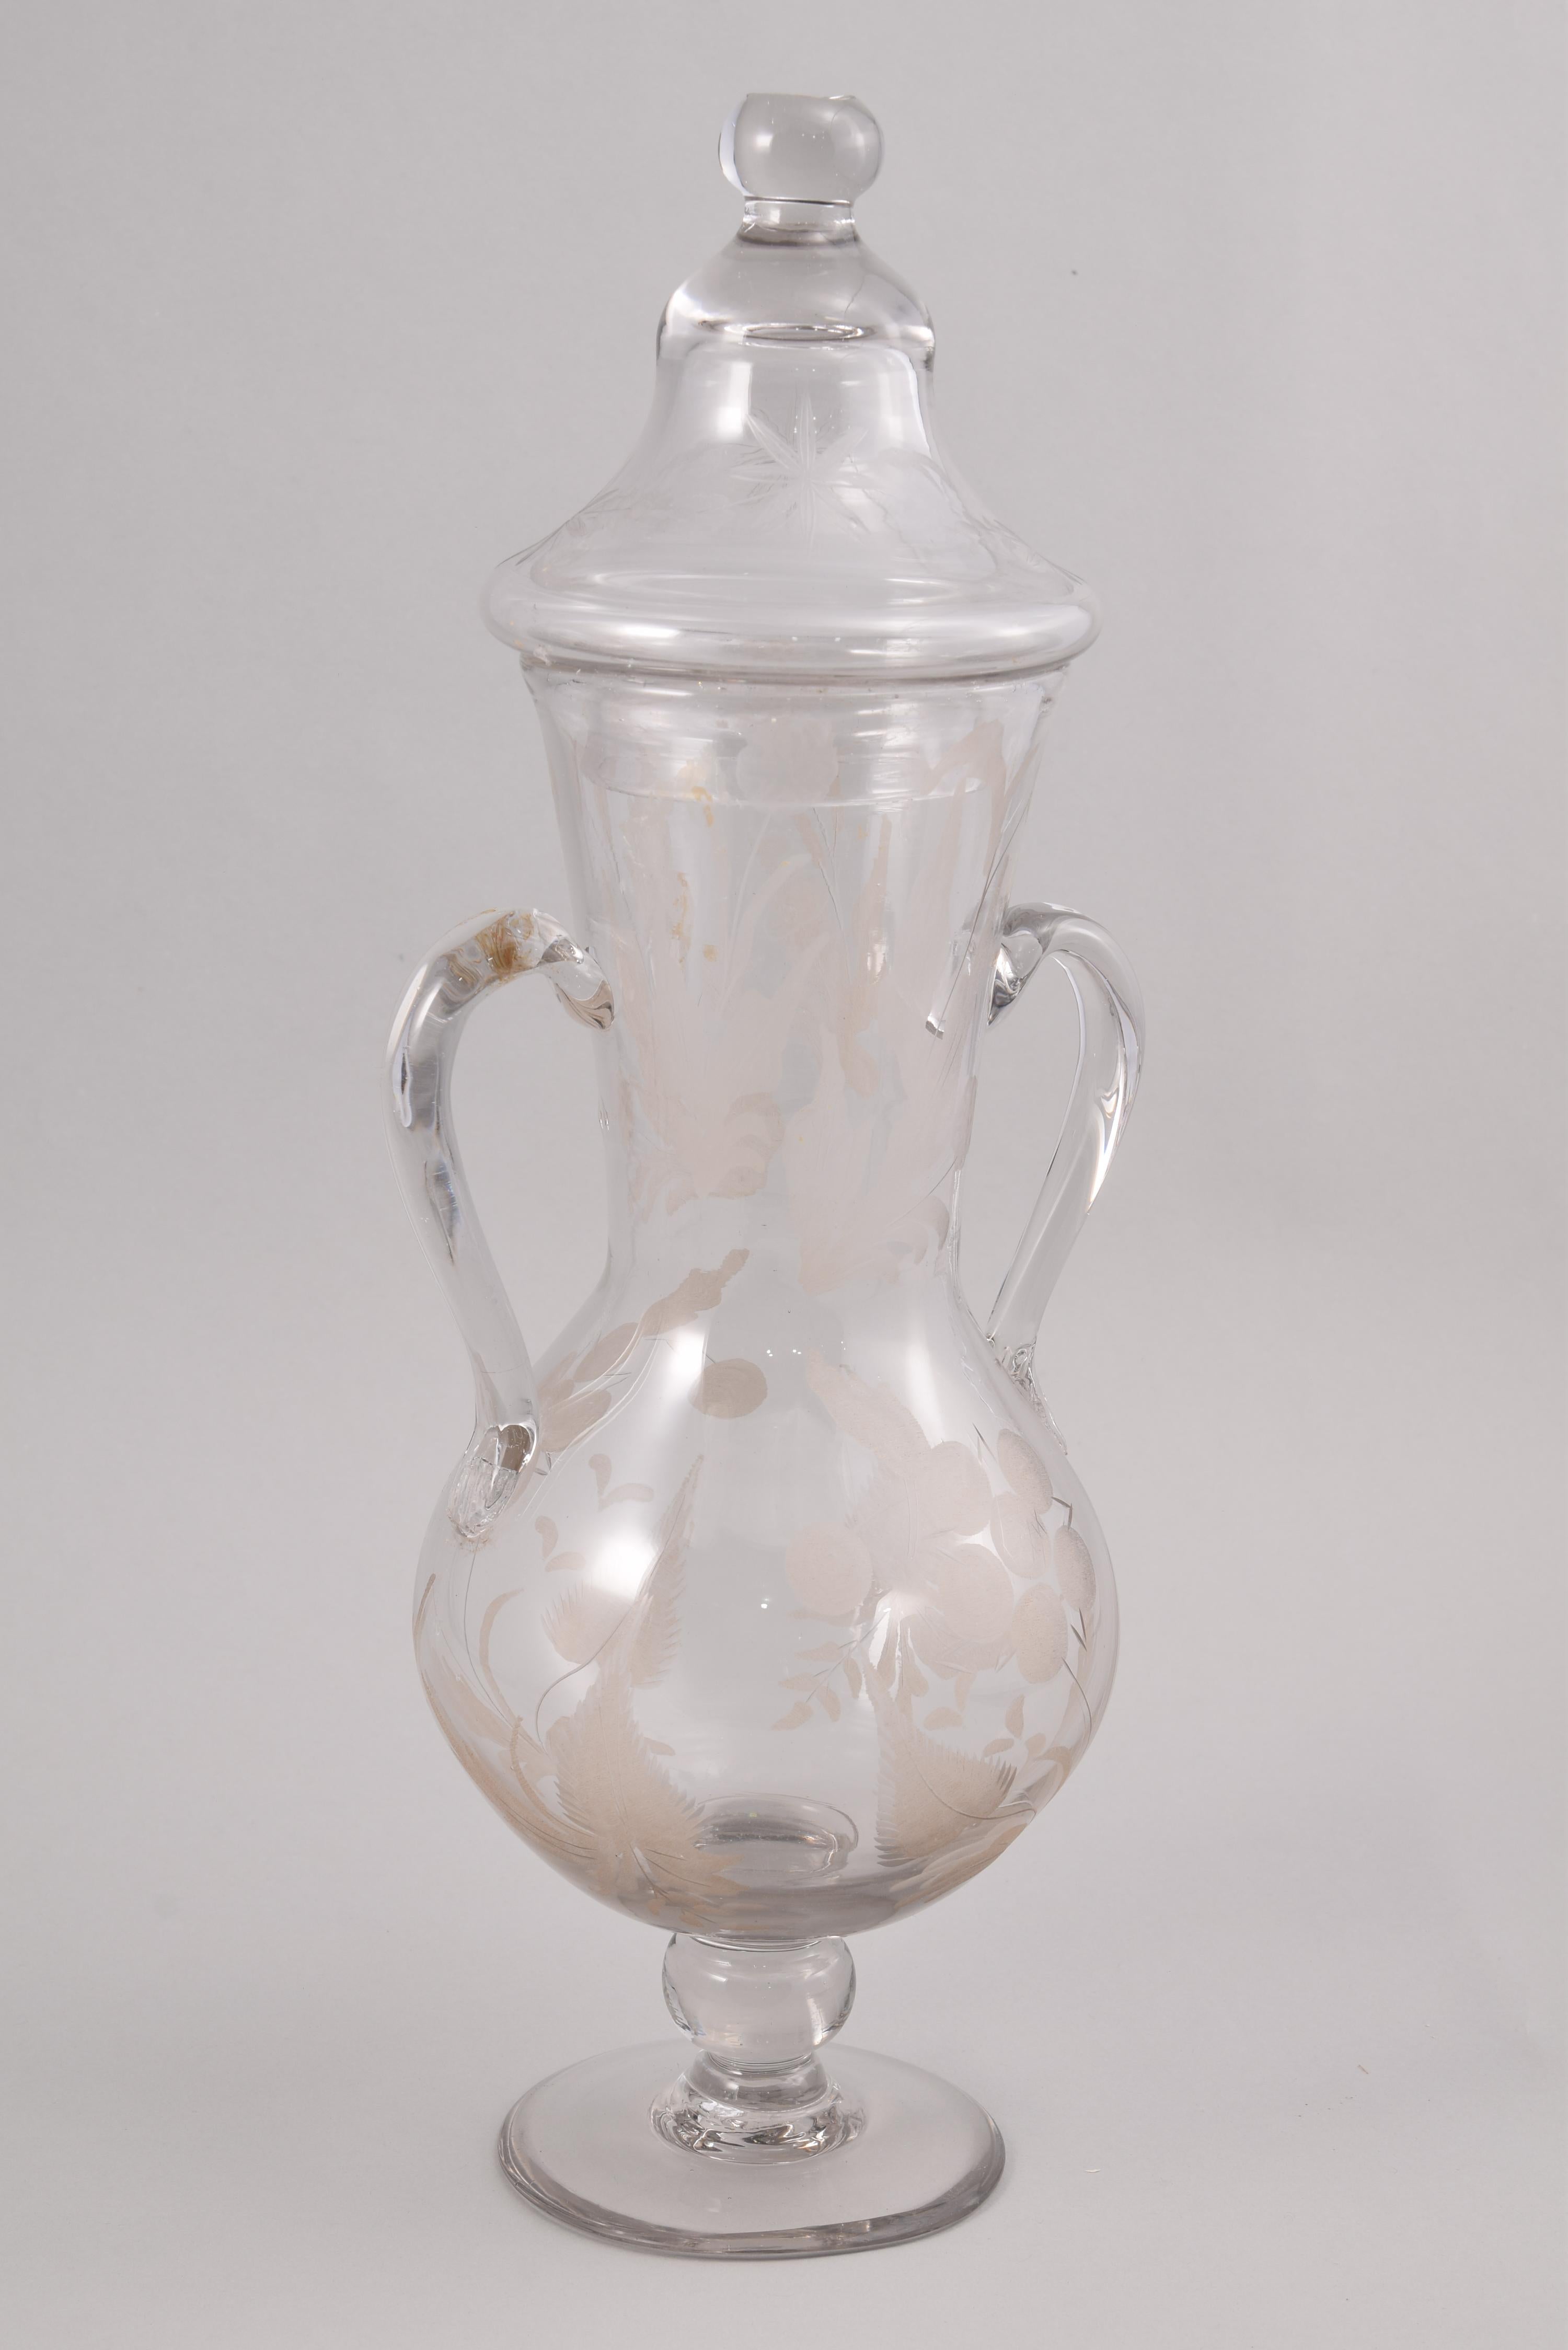 Jug and glass. Glass. Royal Glass Factory of La Granja de San Ildefonso, Segovia, Spain, 18th century. 
Pitcher or vase with lid and glass with a small spout made of cut and engraved transparent glass, decorated with plant elements and